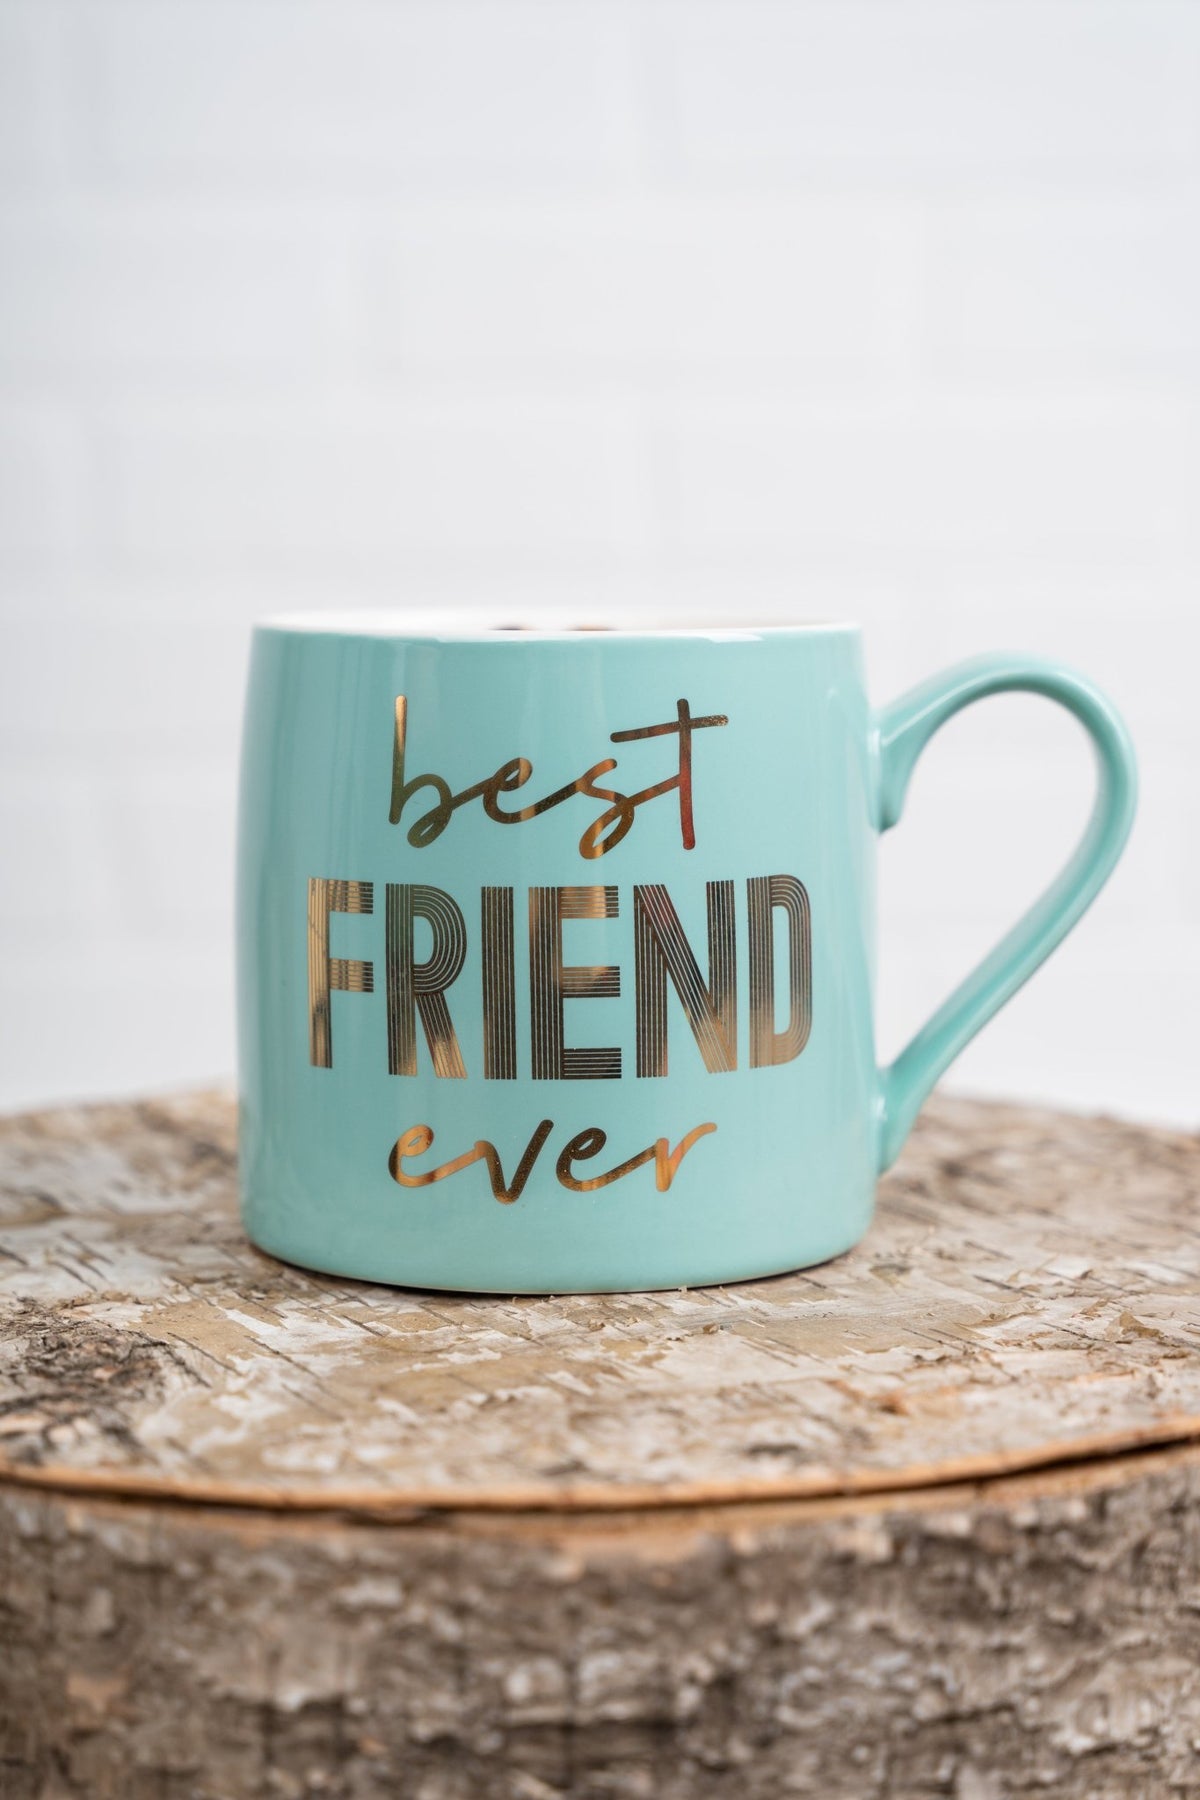 Best Friend Ever jumbo coffee mug - Trendy Tumblers, Mugs and Cups at Lush Fashion Lounge Boutique in Oklahoma City